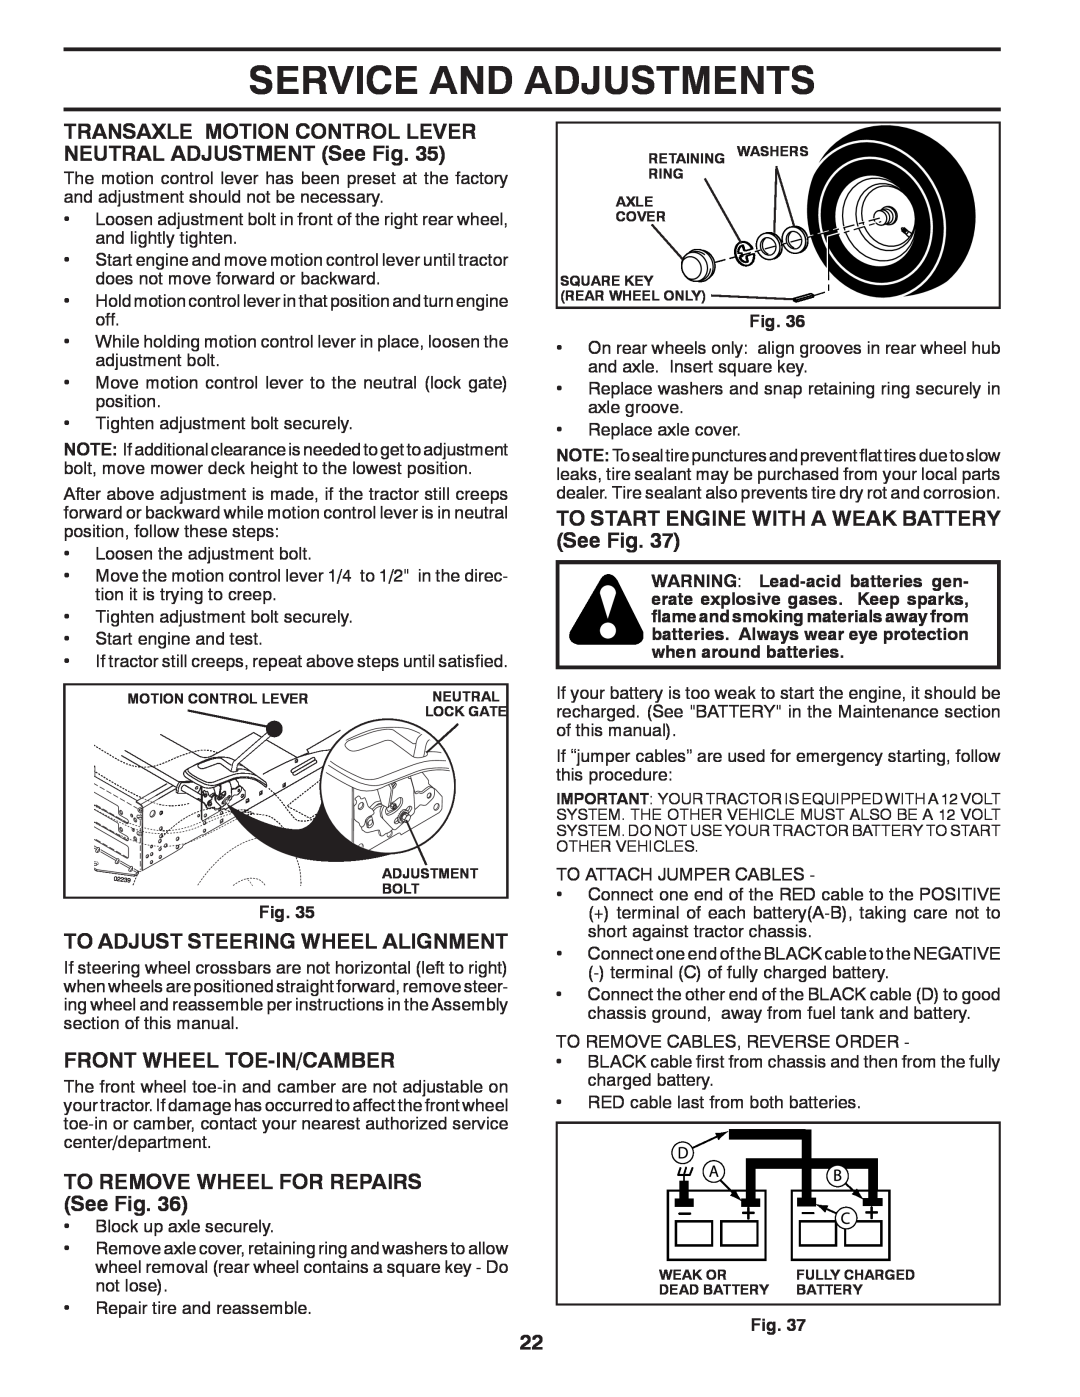 McCulloch 96041018001 manual Service And Adjustments, TRANSAXLE MOTION CONTROL LEVER NEUTRAL ADJUSTMENT See Fig 